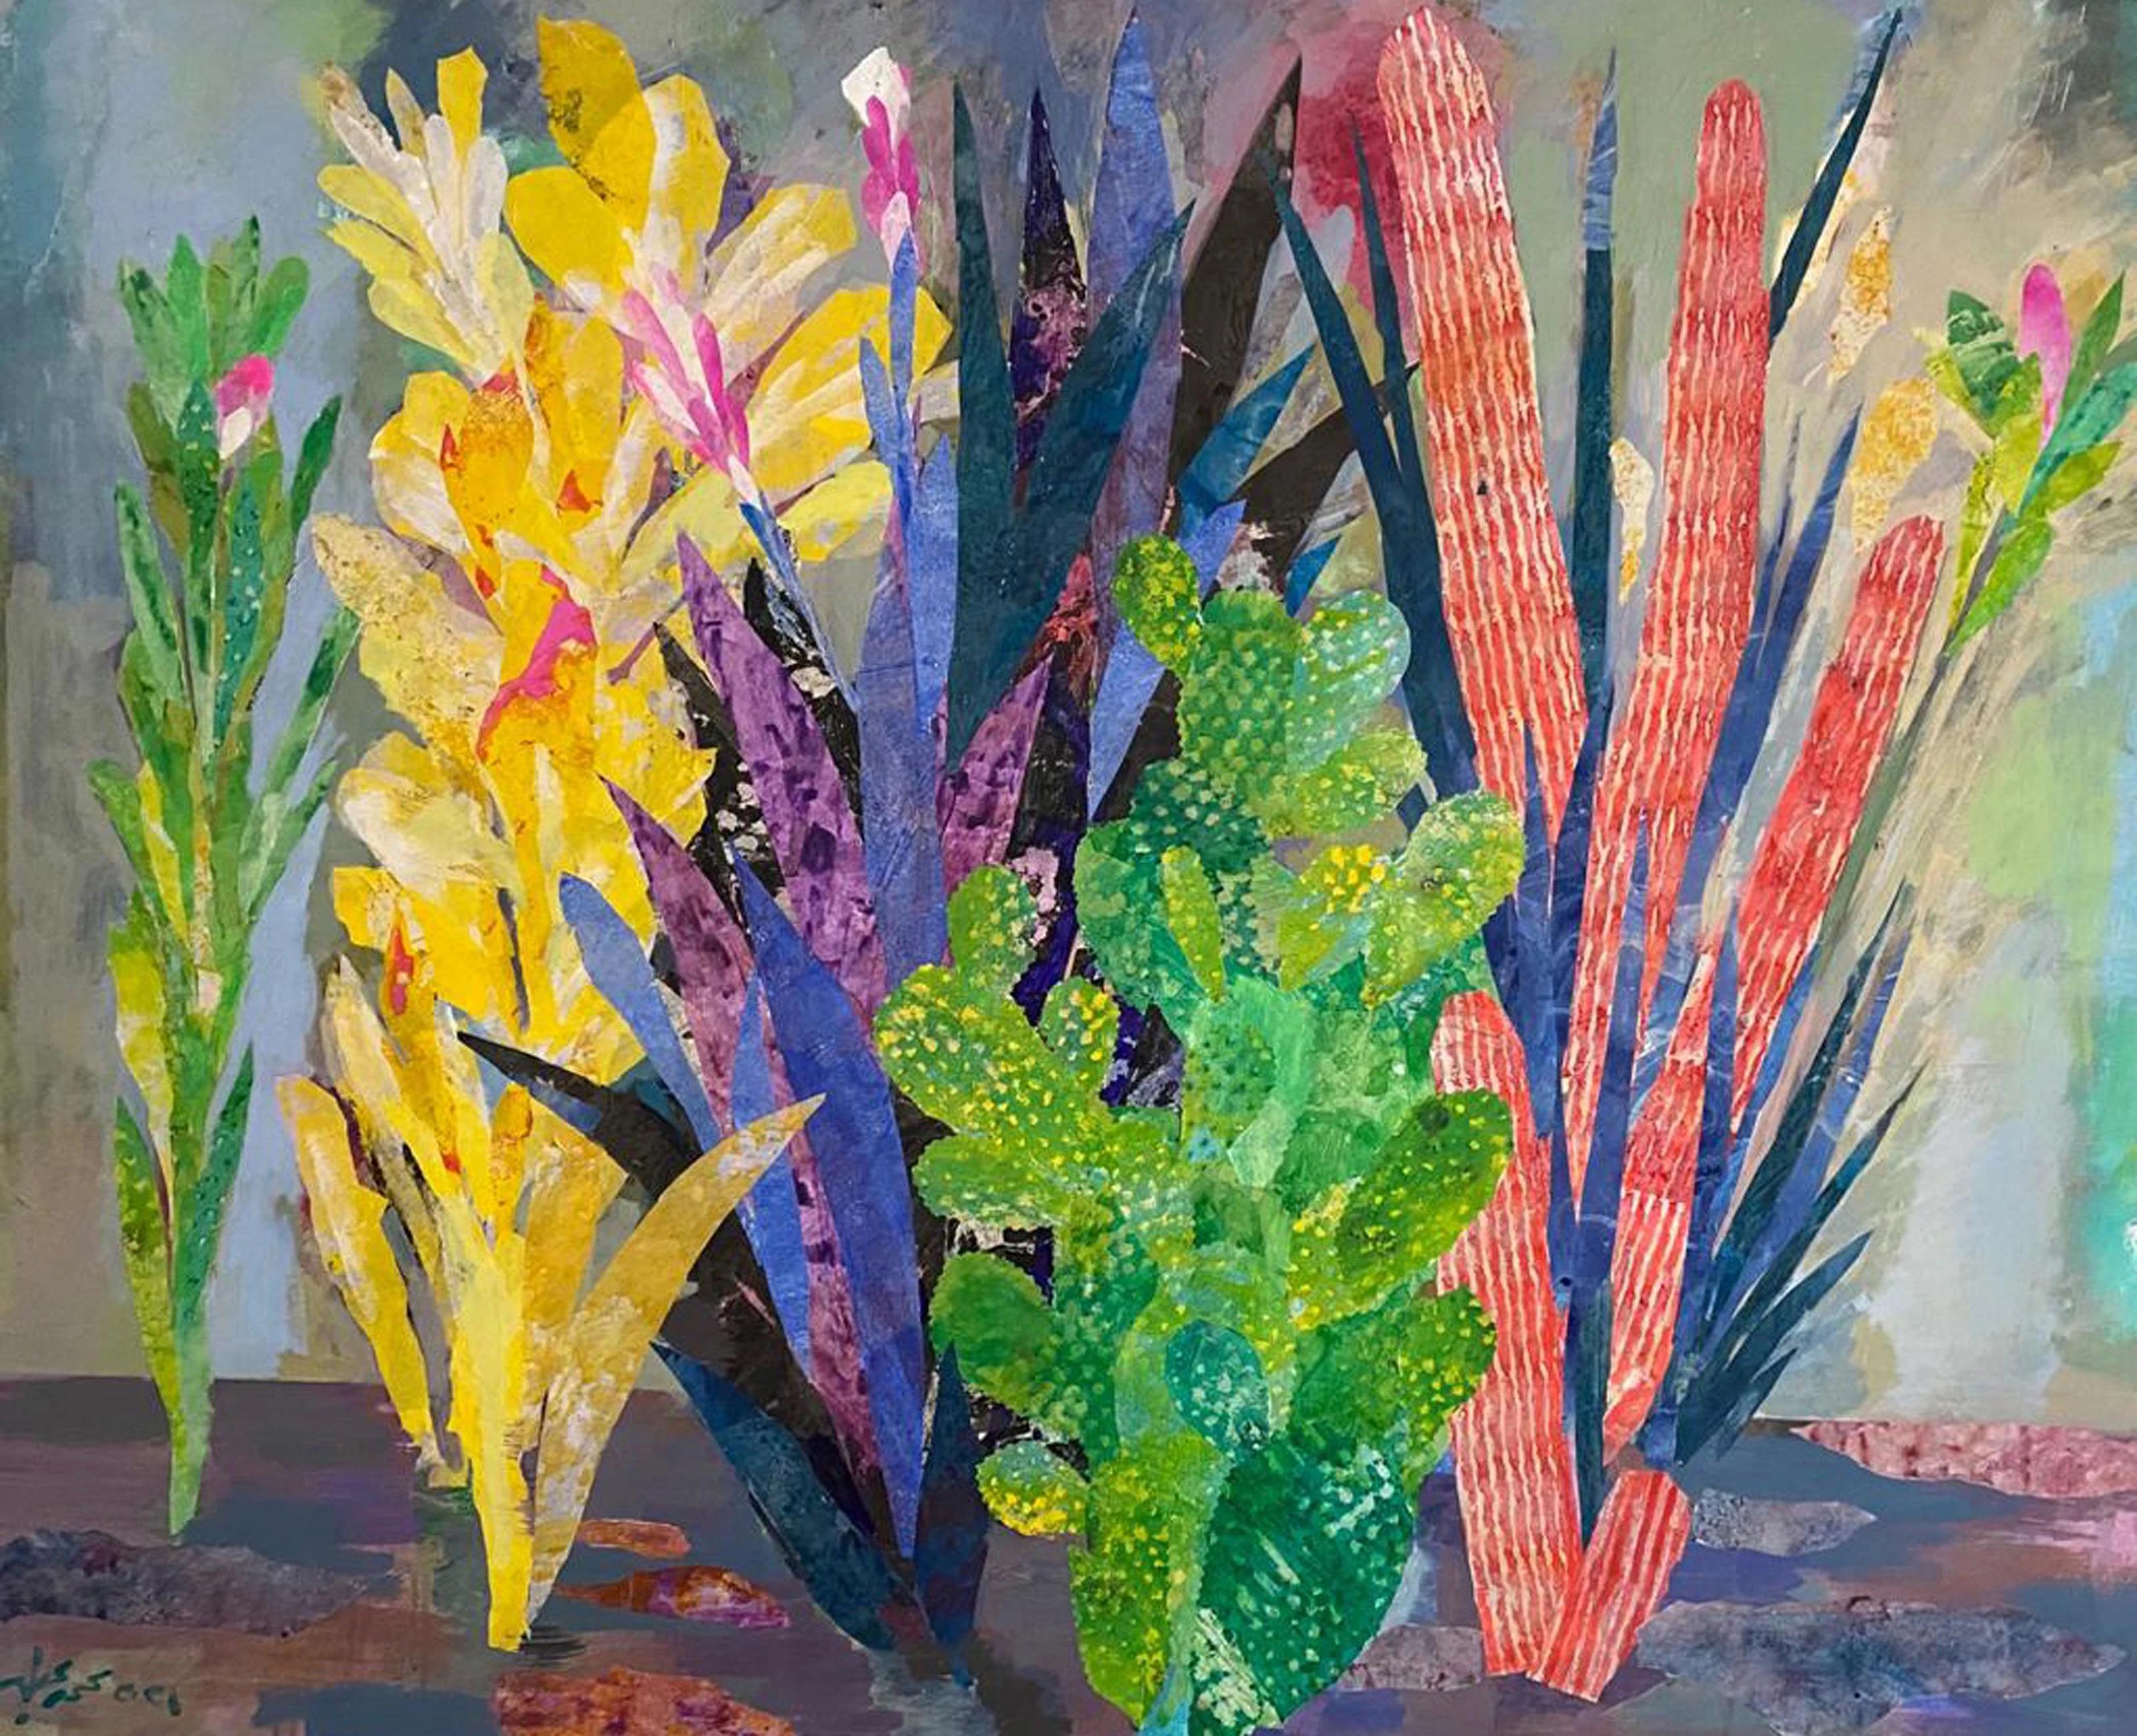 "Cactus Collage" Painting 55" x 63" inch by Mohamed Abla


Mohamed Abla was born in Mansoura (North of Egypt) in 1953. There he spent his childhood and finished school. In 1973 he moved to Alexandria to start a five-year art study at the faculty of